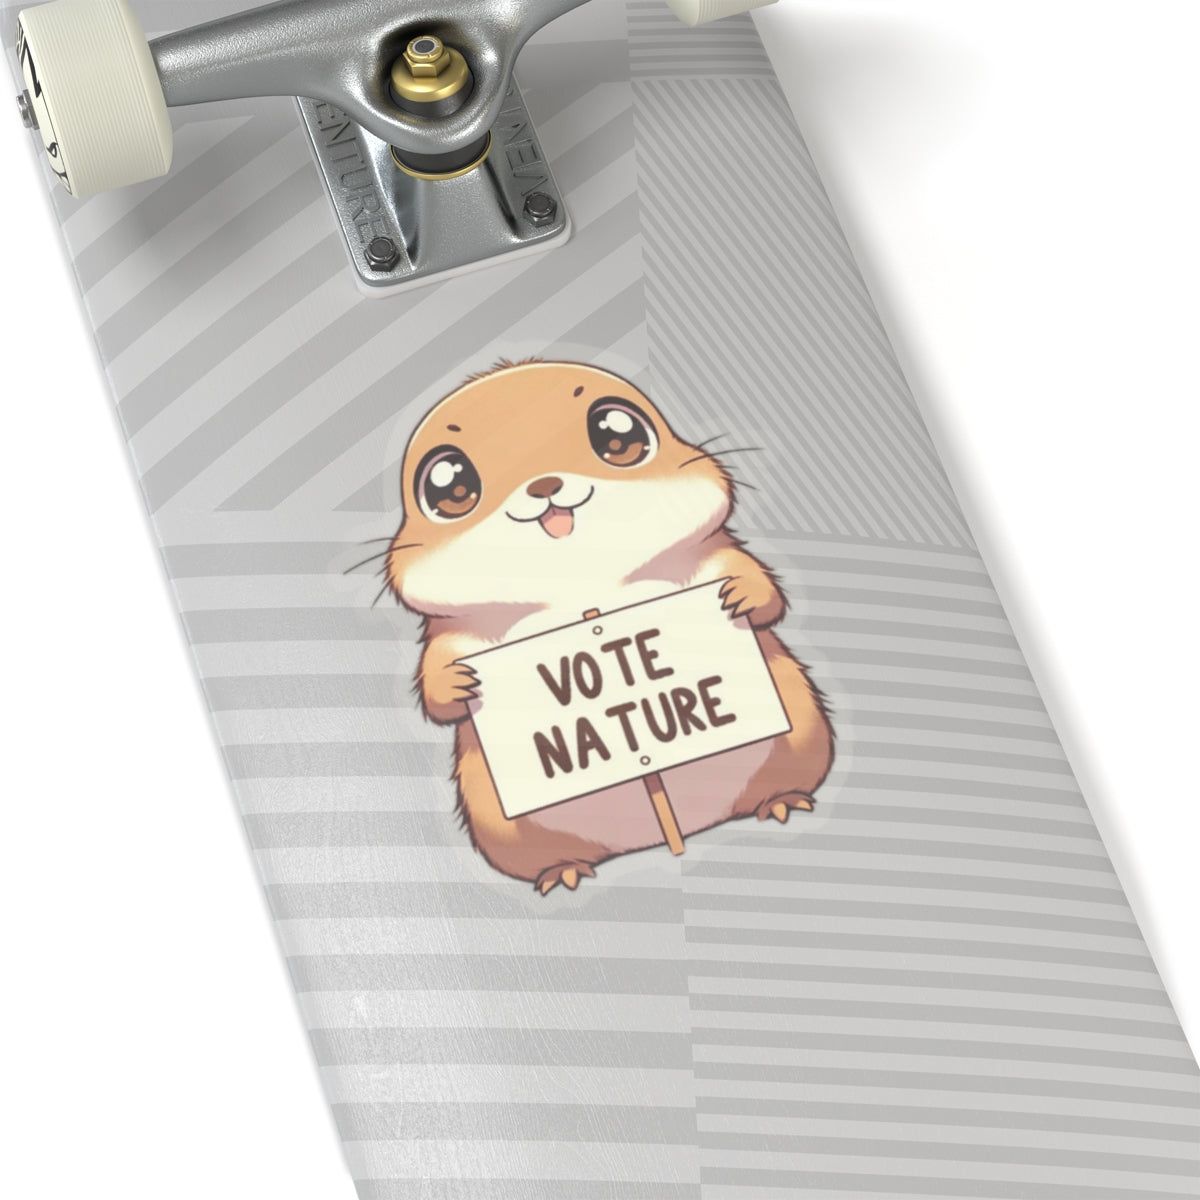 Inspirational Cute Prairie Dog Statement vinyl Sticker: Vote Nature! for laptop, kindle, phone, ipad, instrument case, notebook, mood board